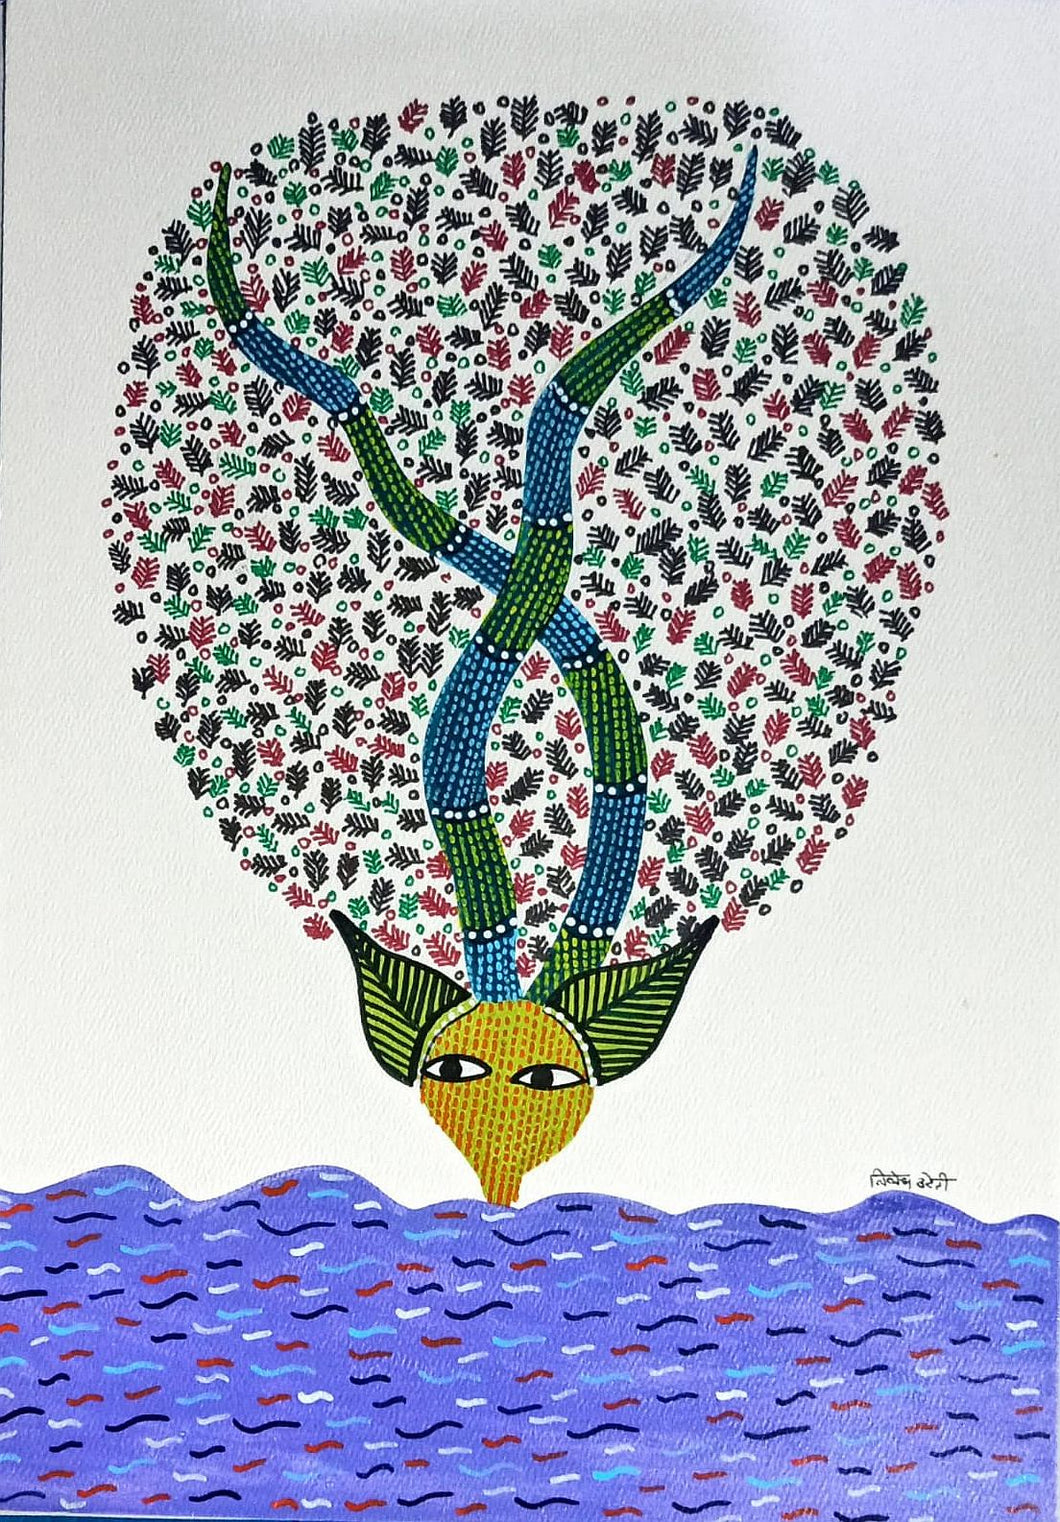 The Ocean : Gond painting by Lilesh Urweti